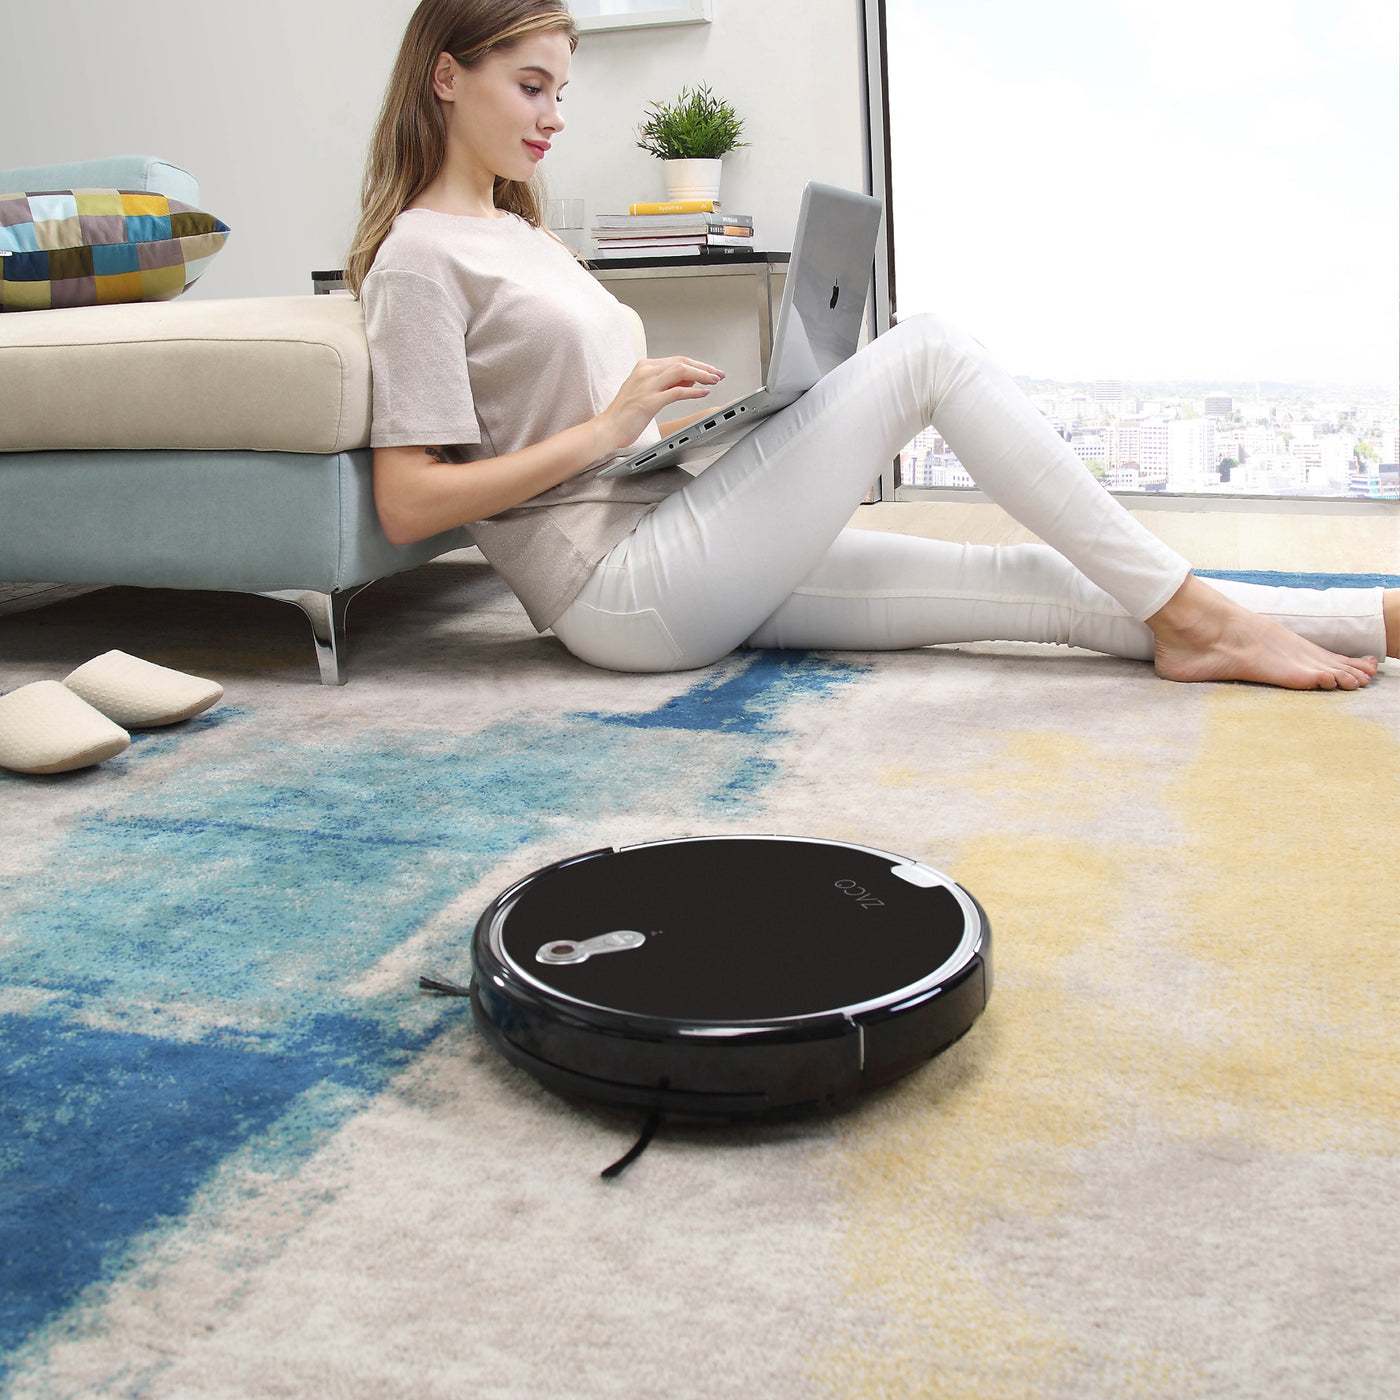 ZACO A8s vacuuming and mopping robot